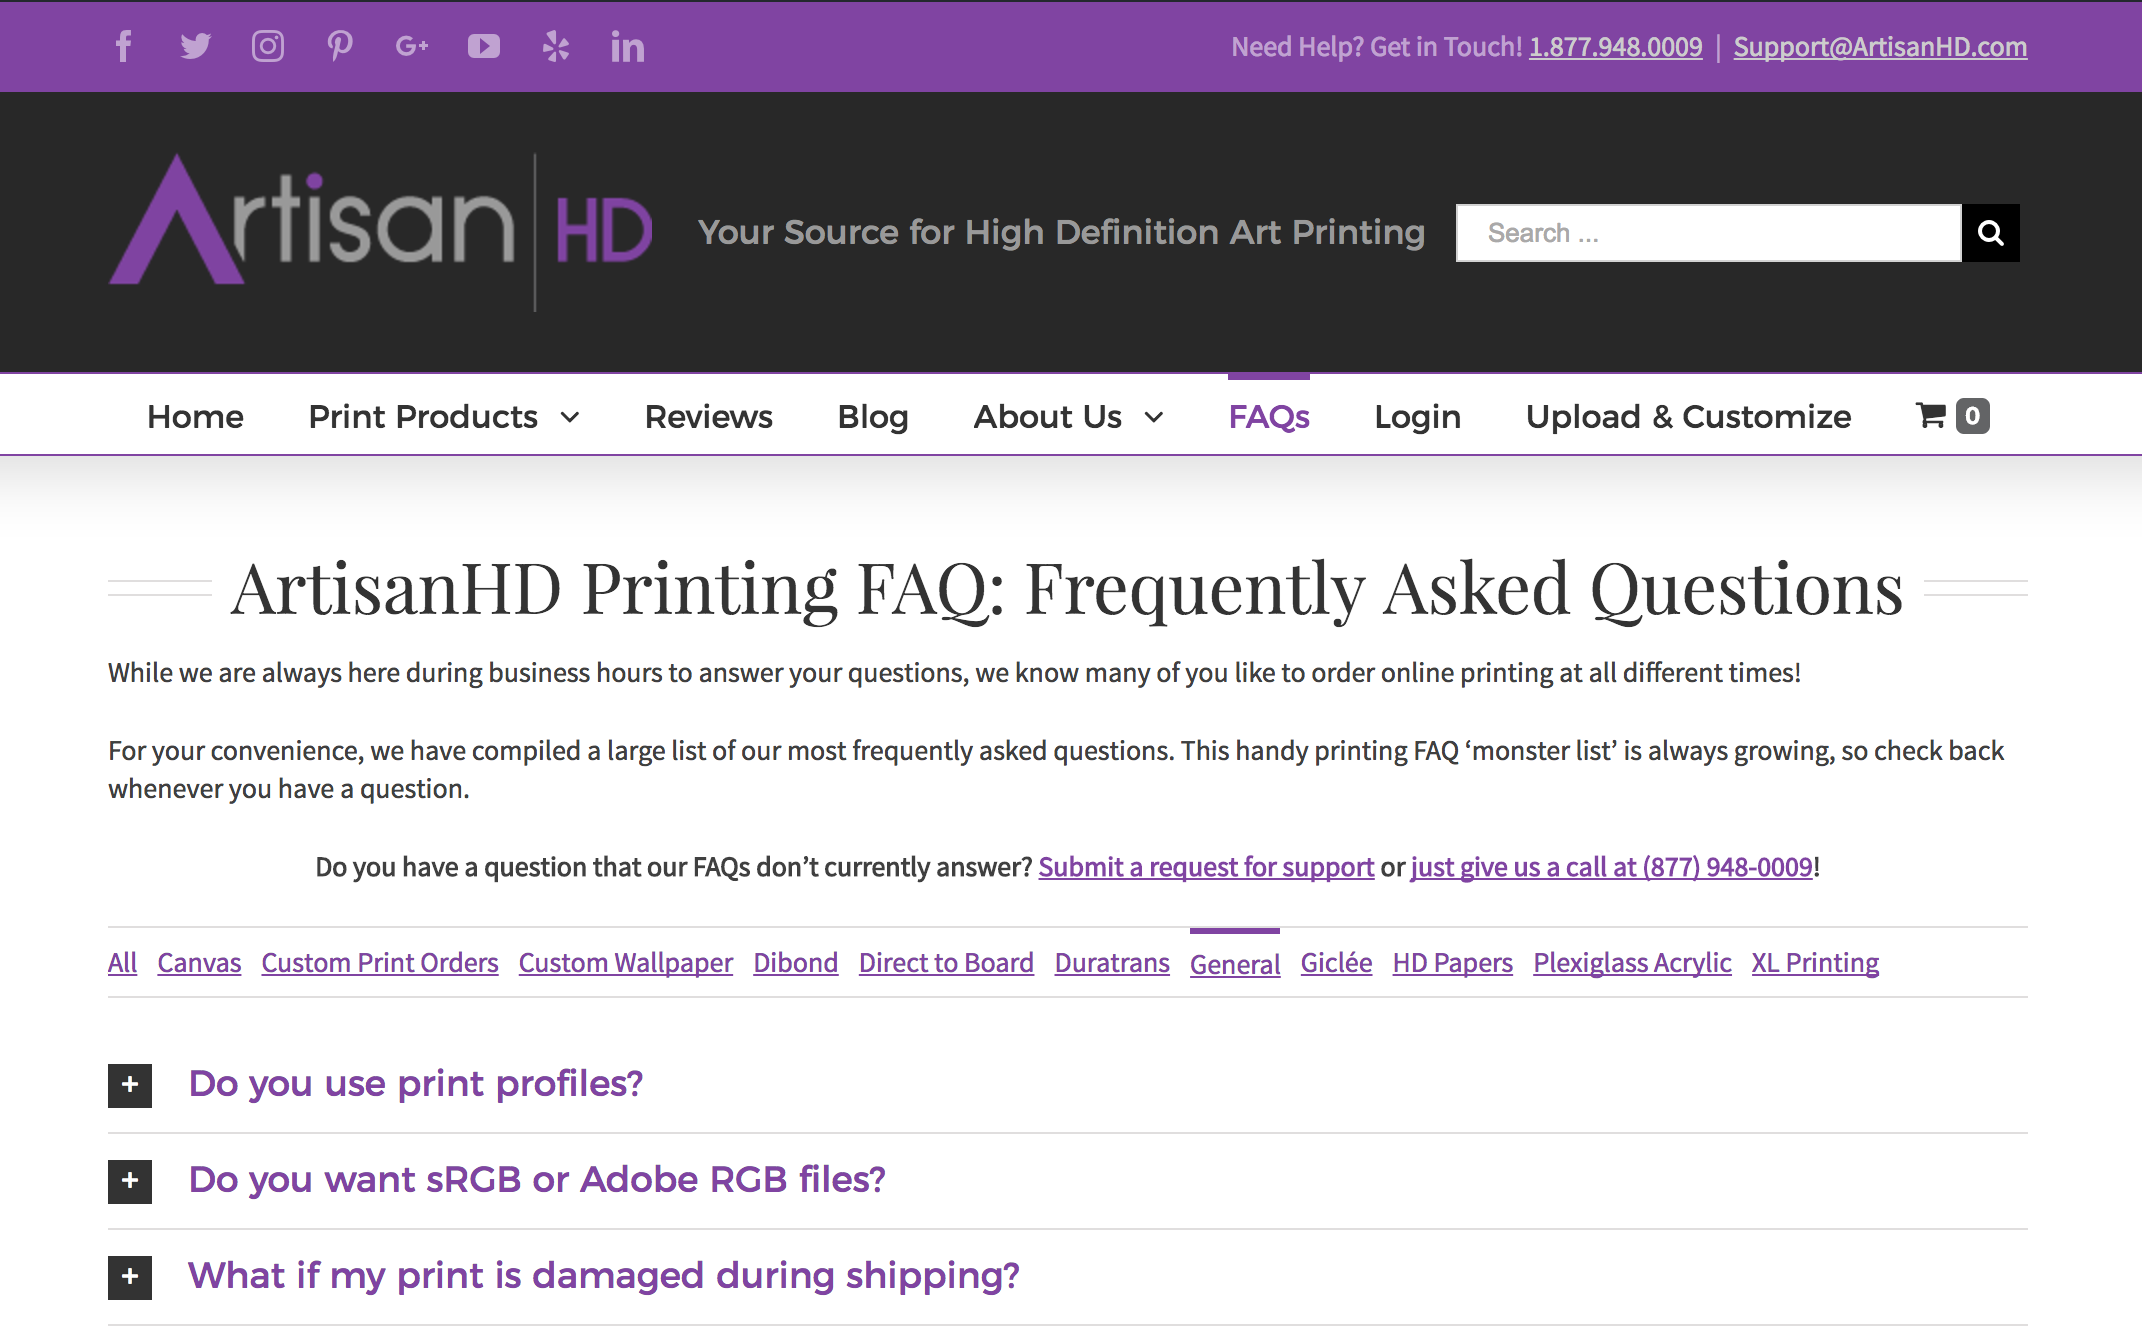 Frequently Asked Printing Questions